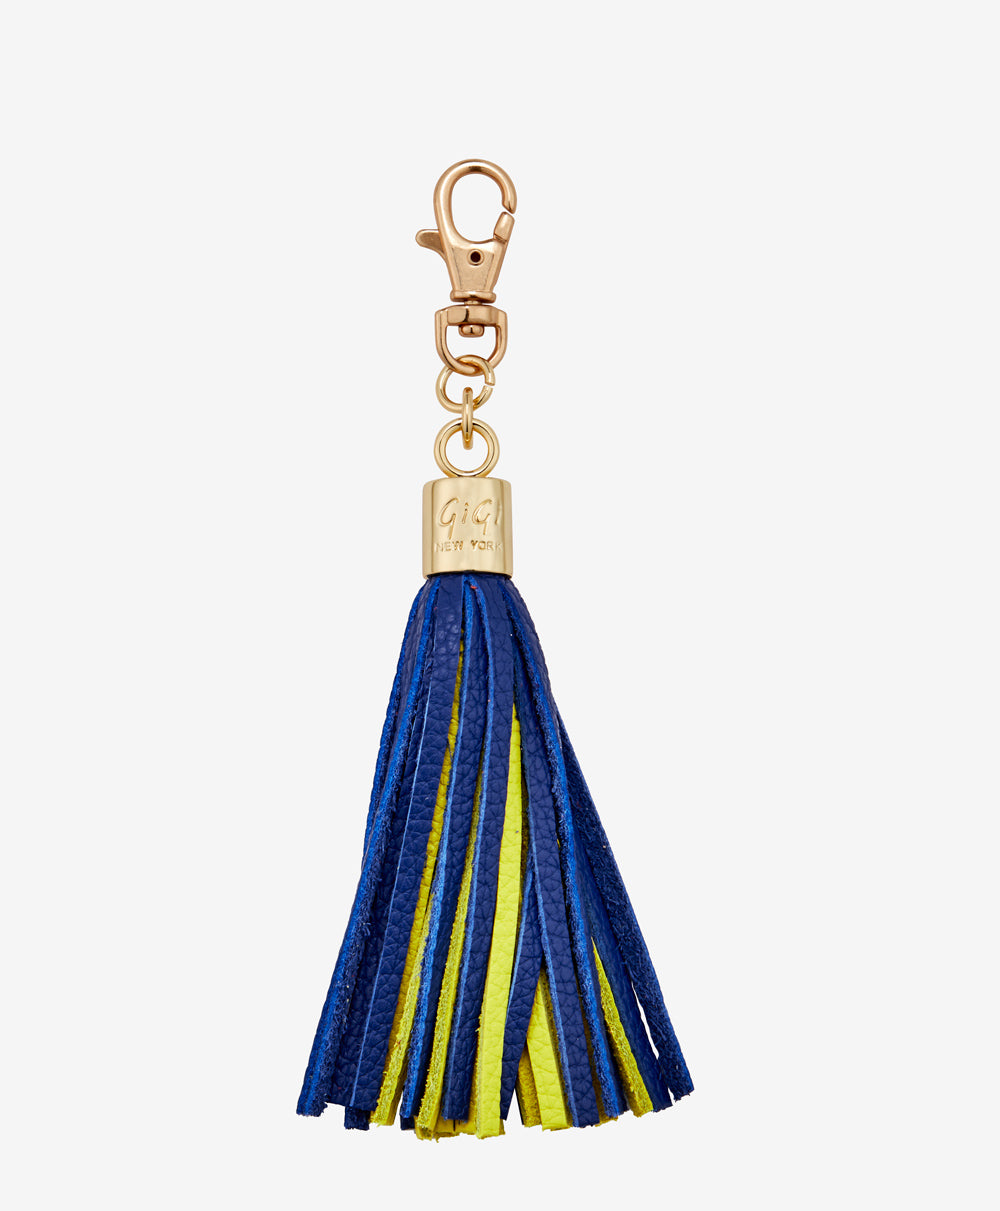 Chain Gold Key and | Leather Leather Tassel Navy